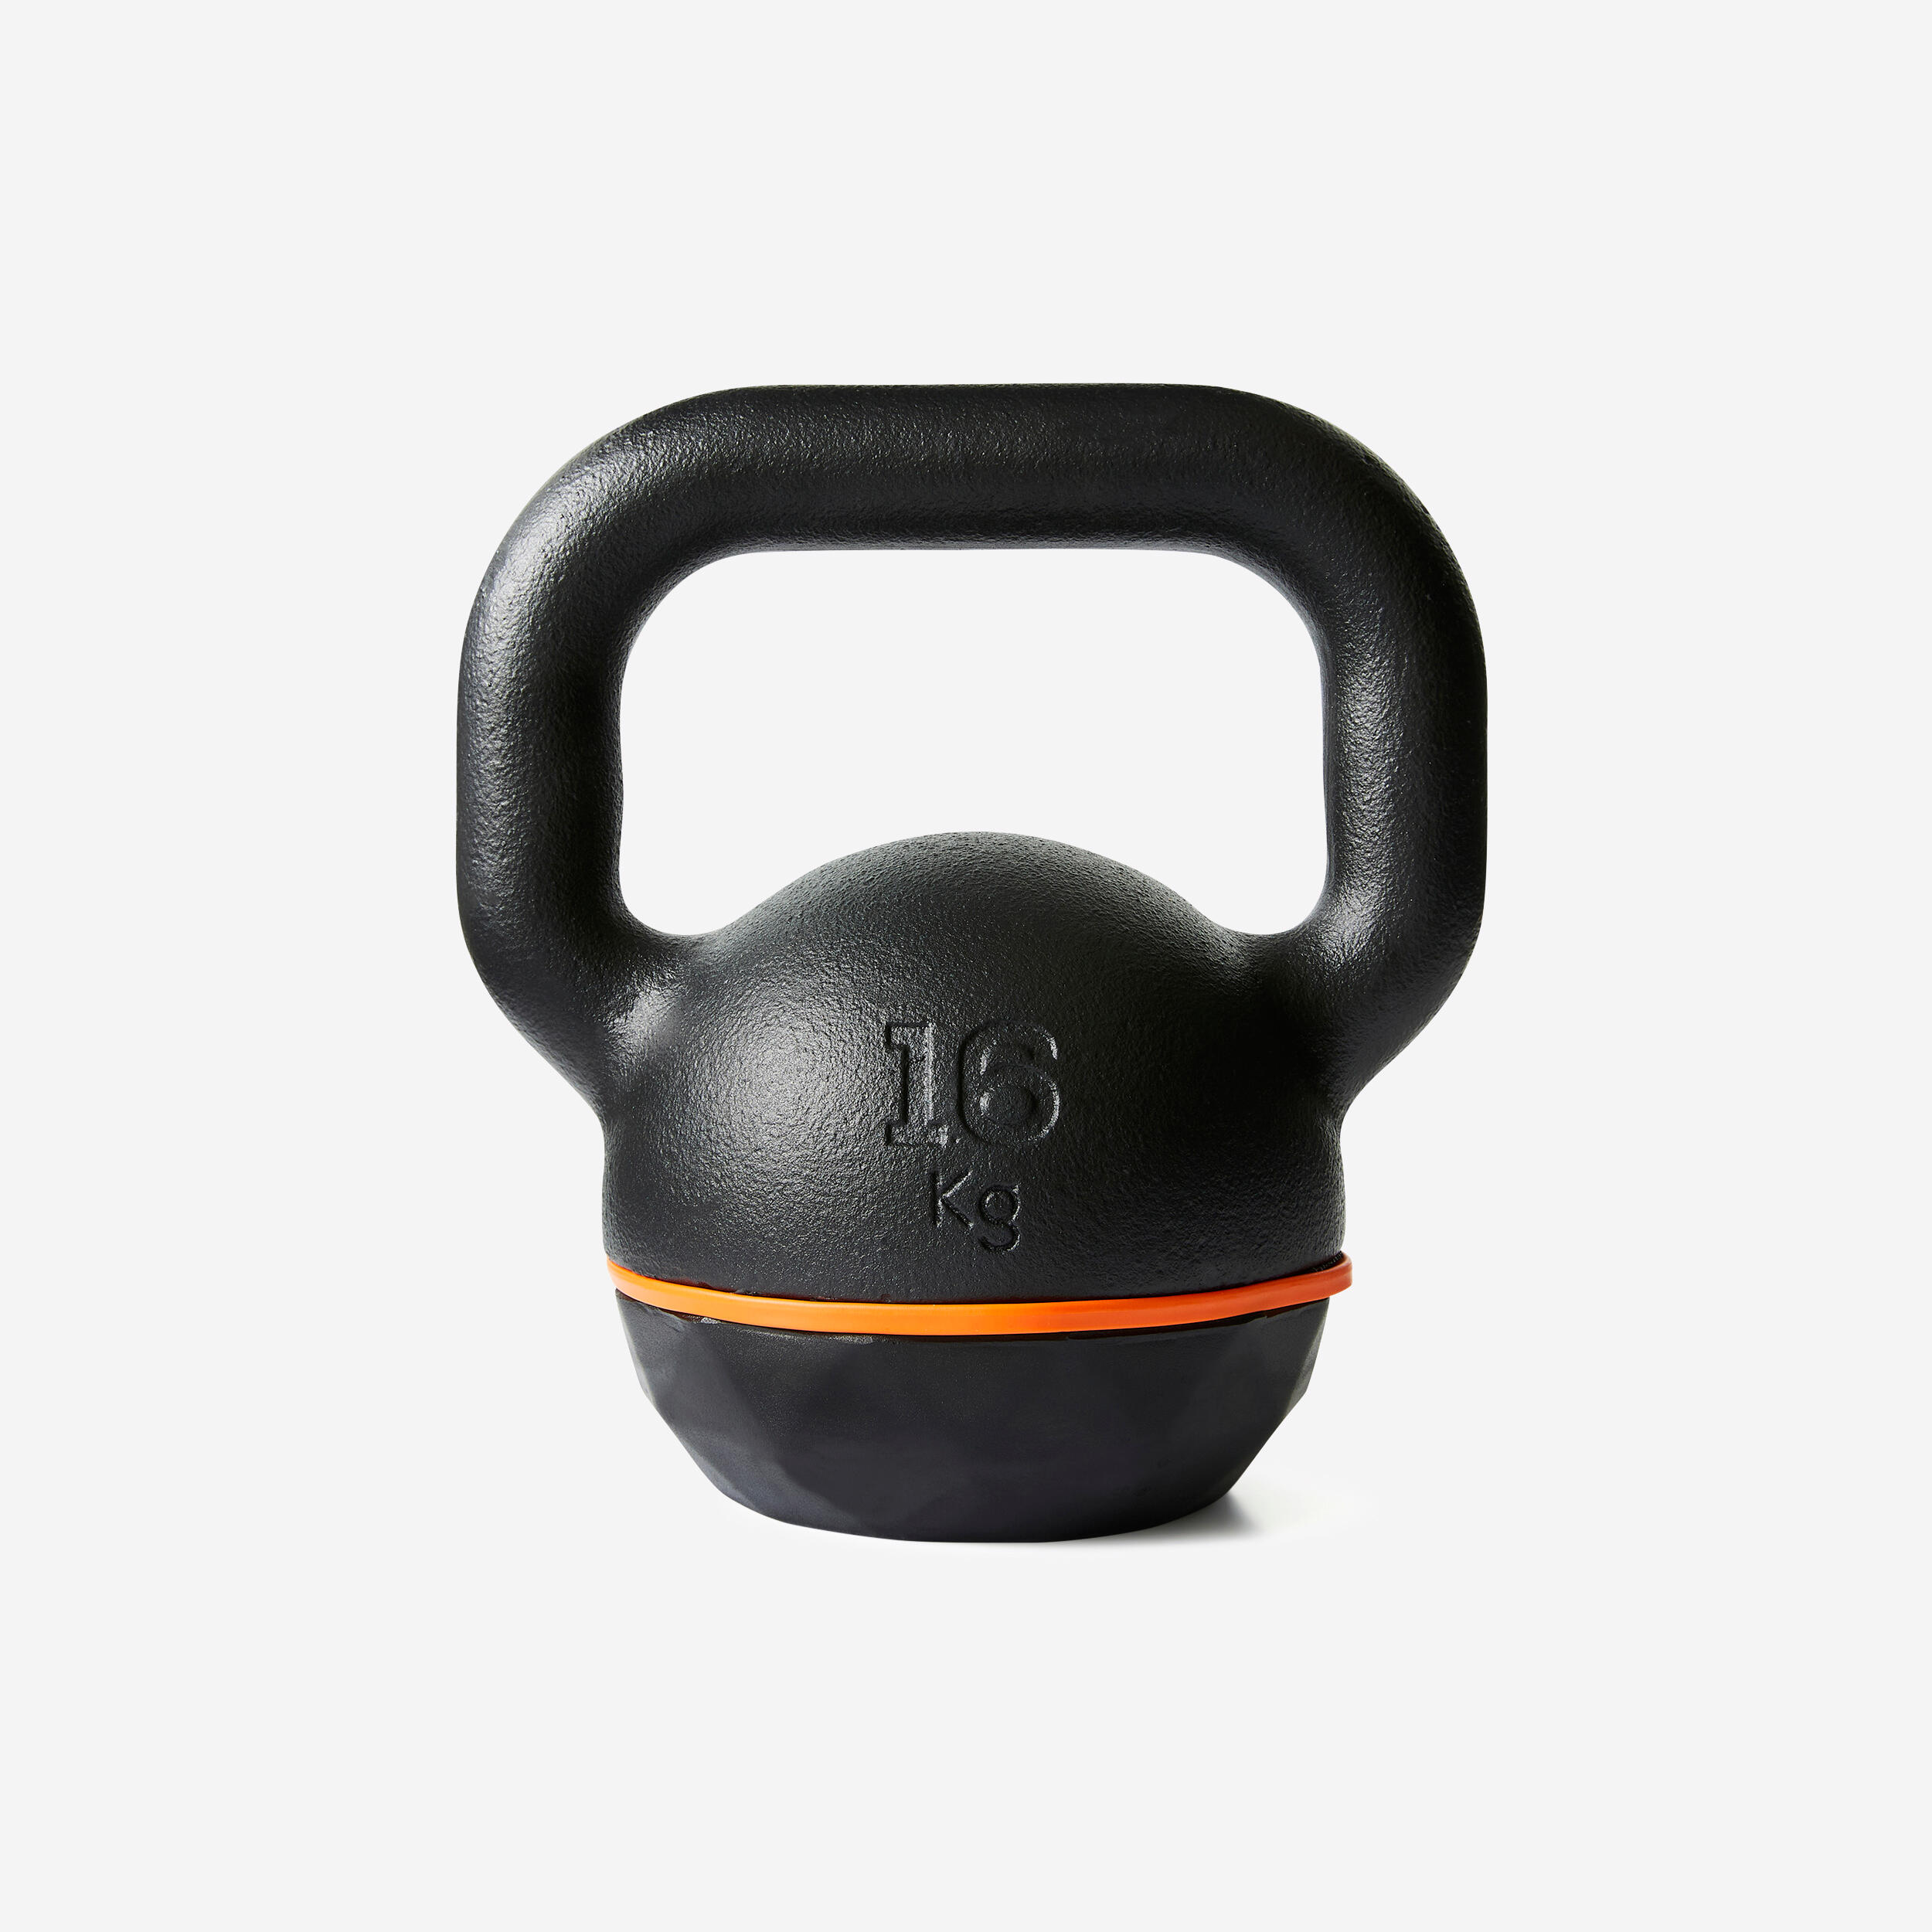 Cast Iron Kettlebell with Rubber Base - 16 kg 1/8